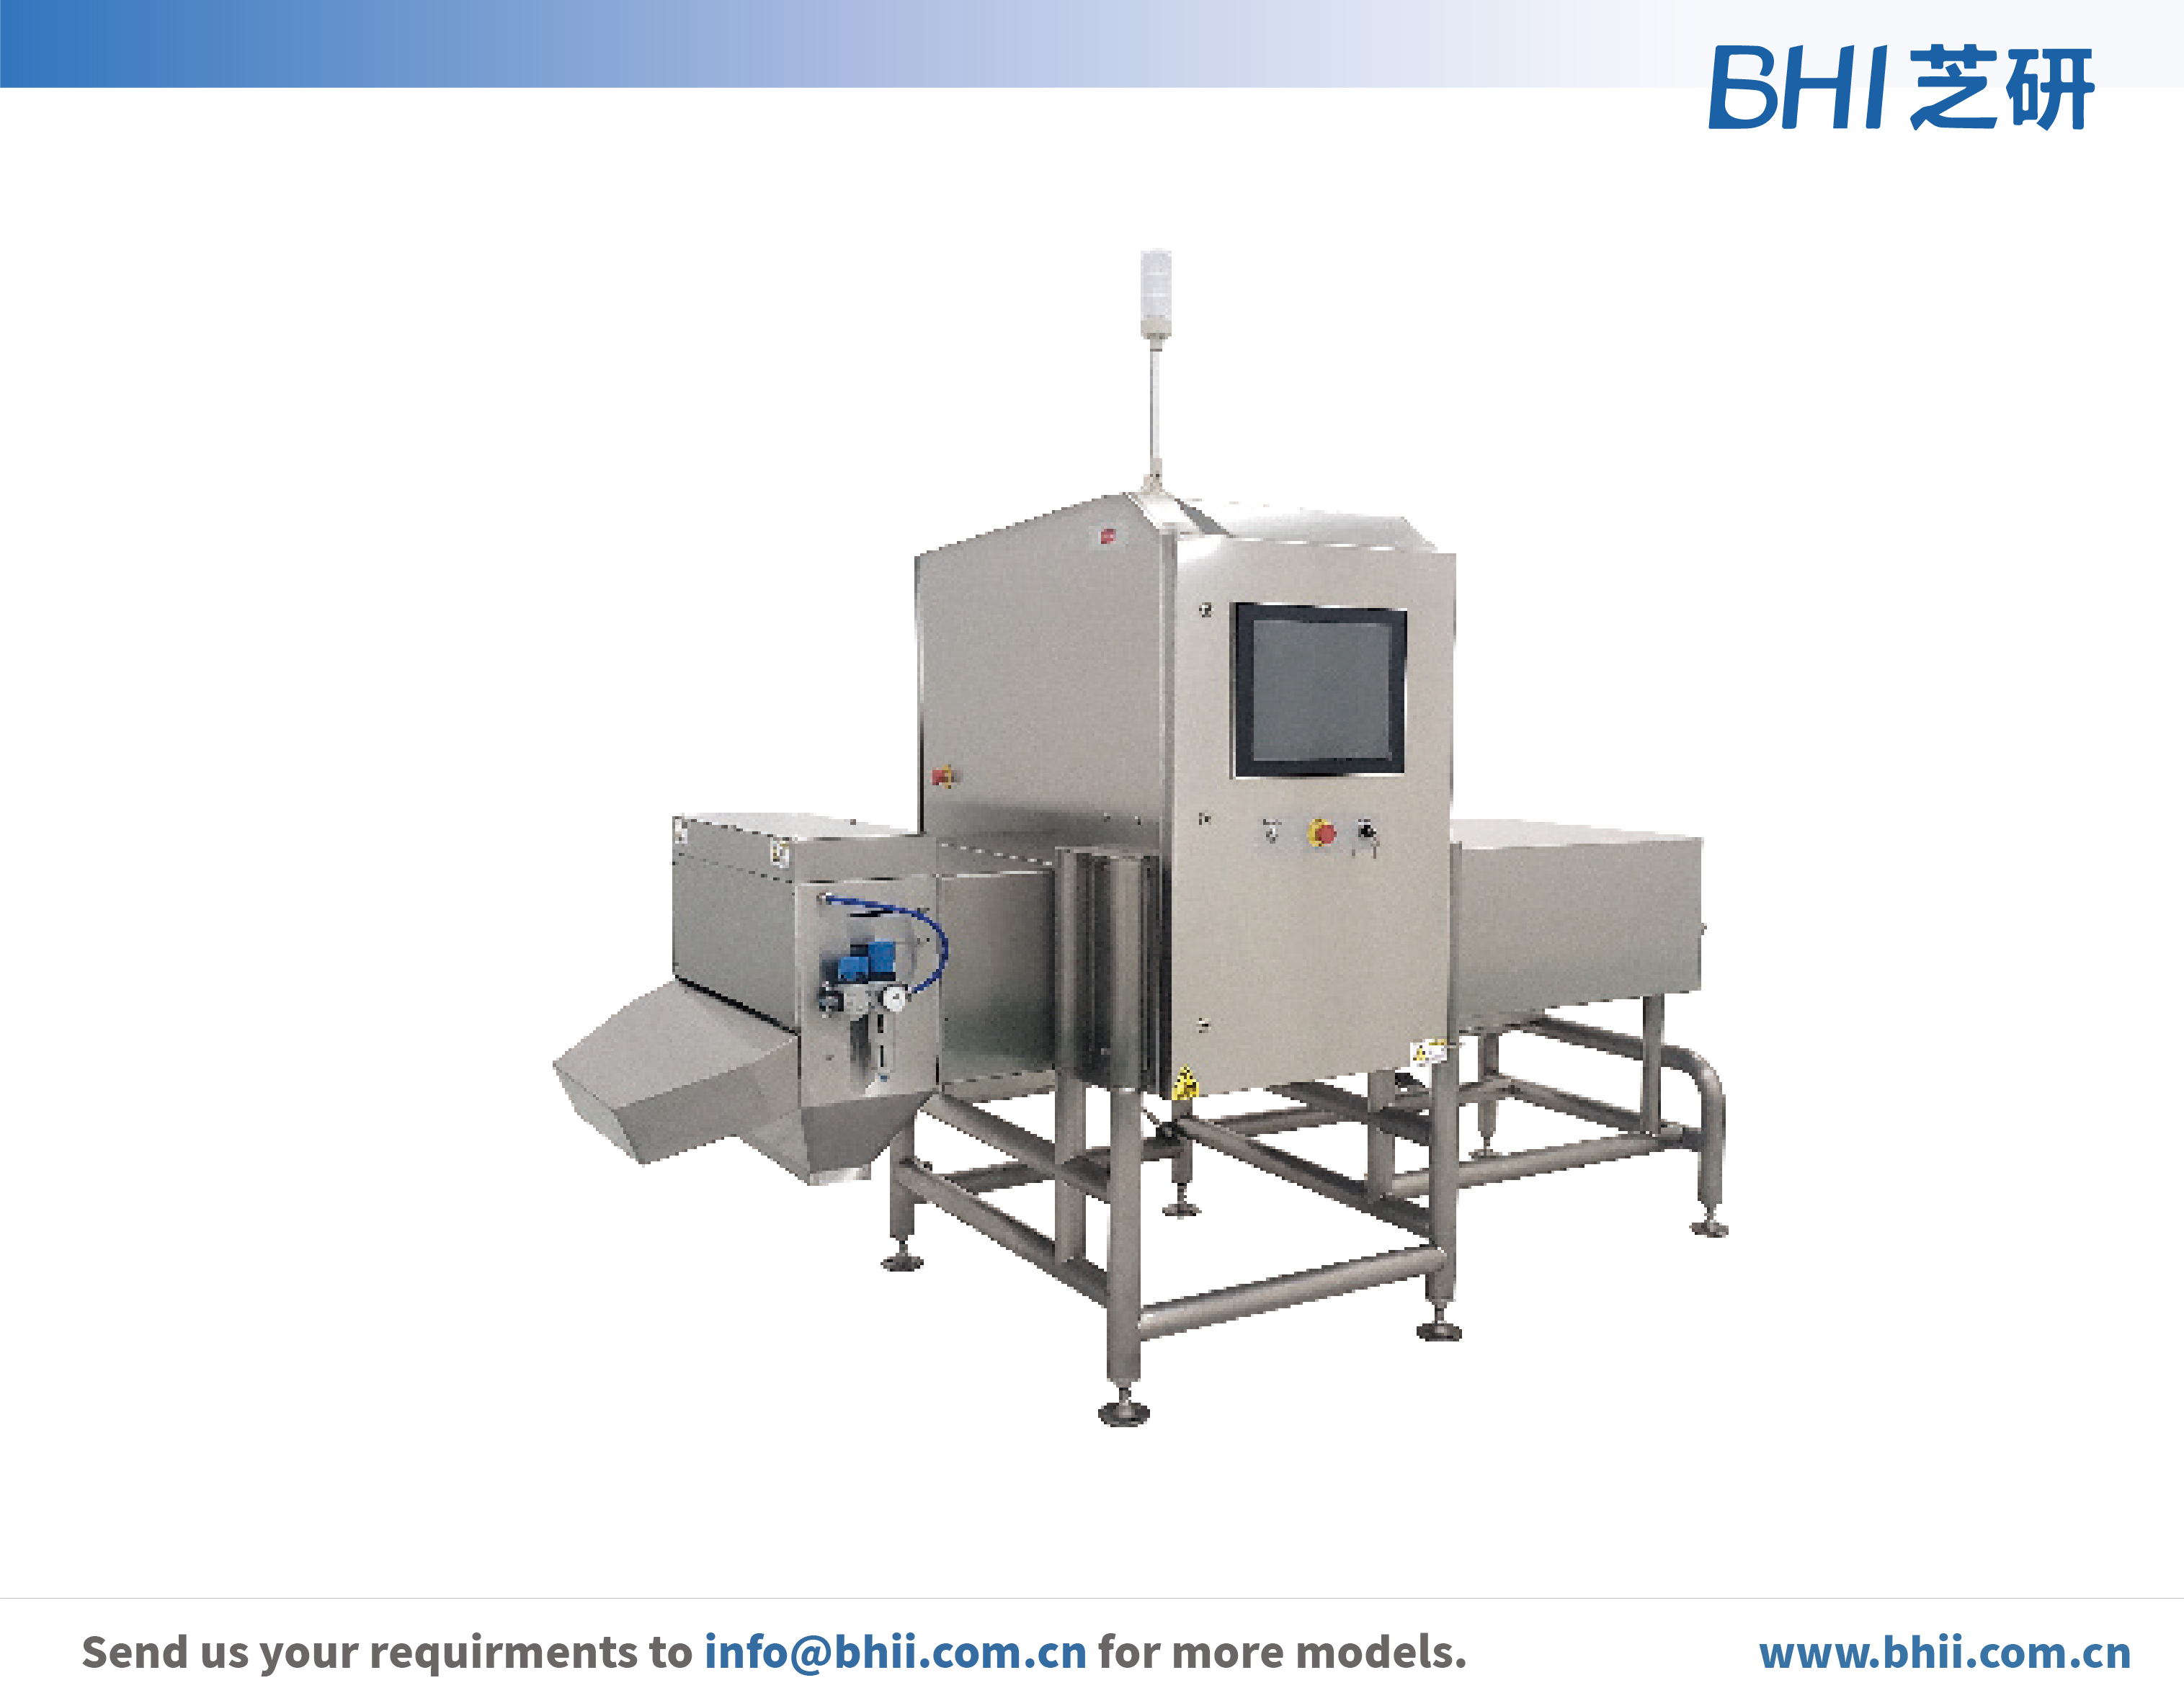 Bulk Material X-ray Inspection System